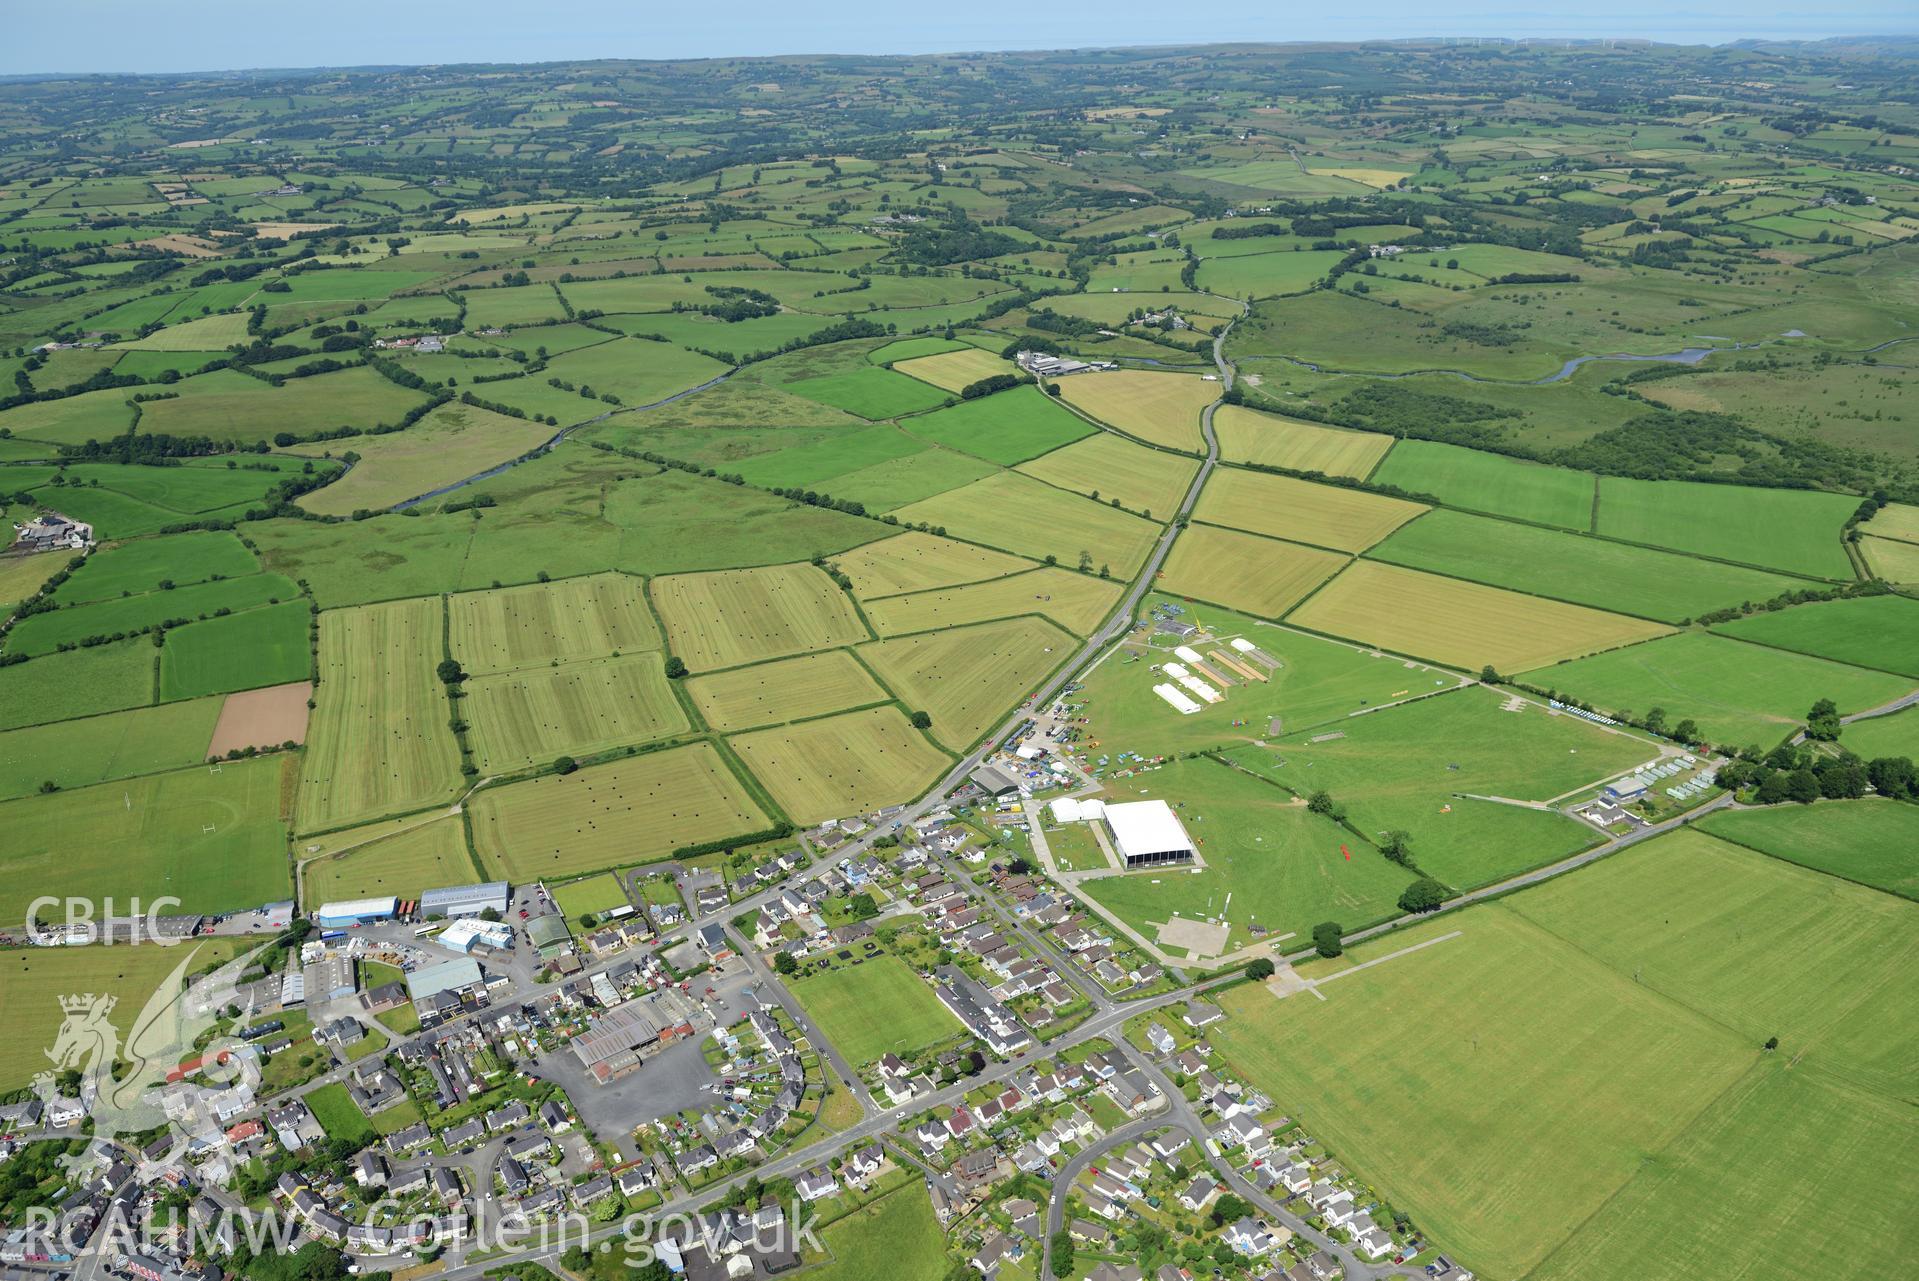 Digital colour aerial photograph showing National Eisteddfod Maes, Tregaron, taken on 11th July 2022.